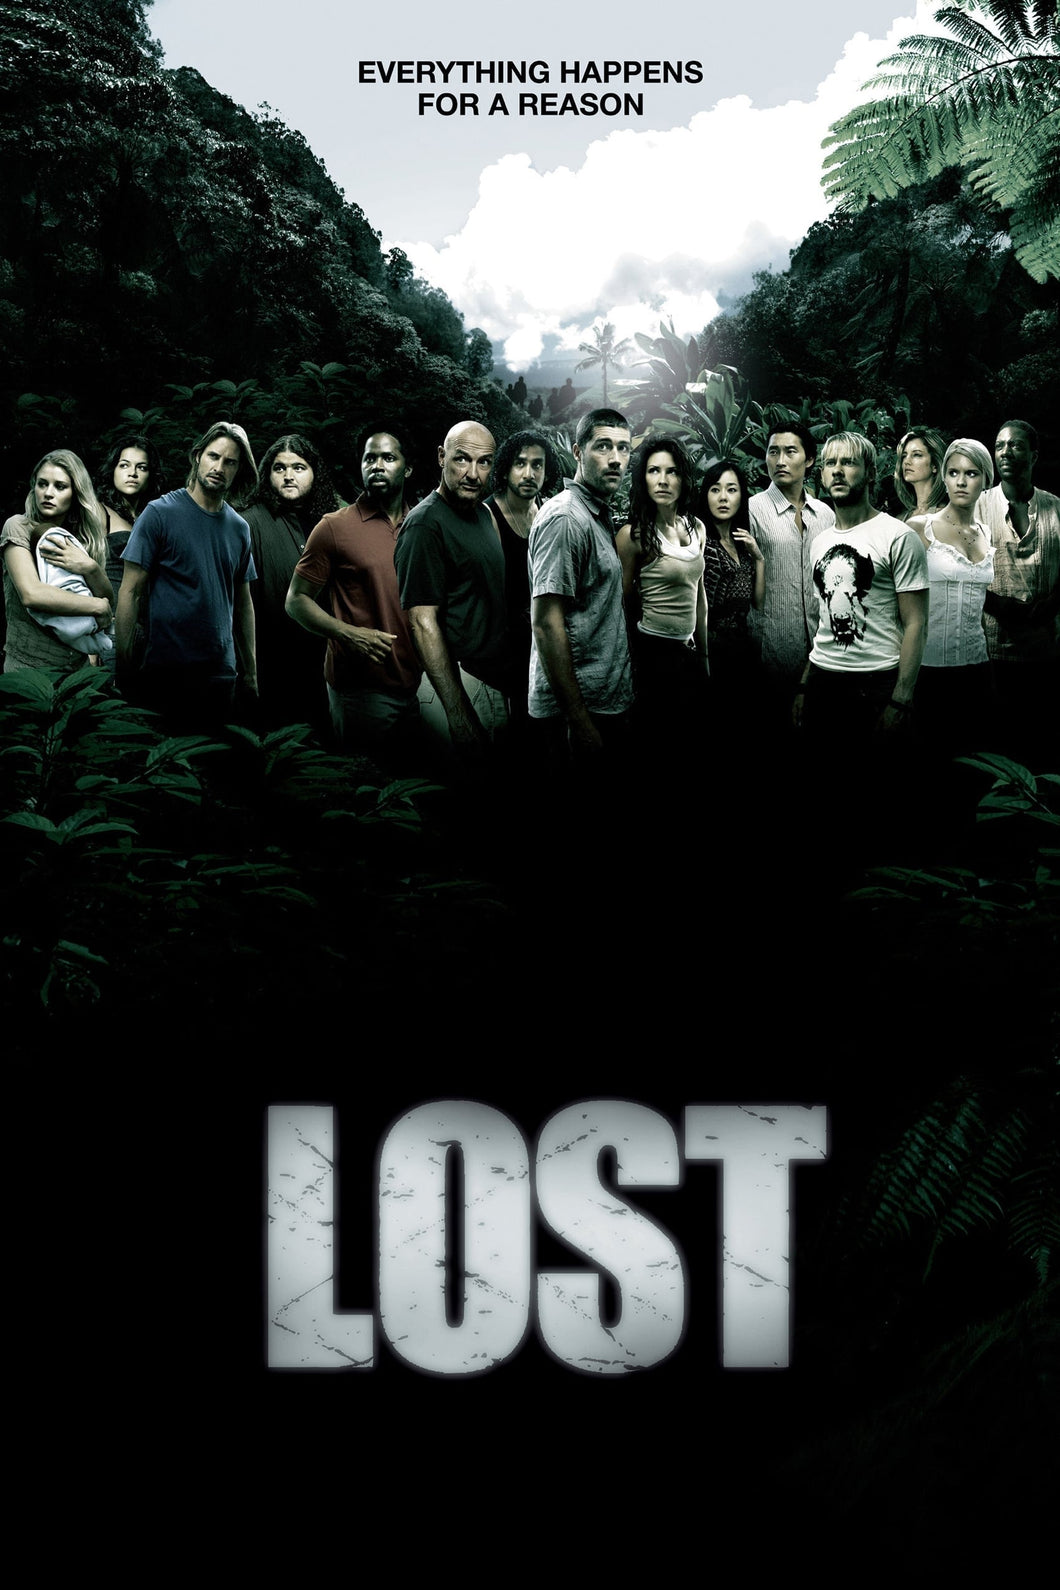 Lost (2004)v4 TV Series High Quality Glossy Paper A1 A2 A3 A4 A3 Framed or Unframed!!!